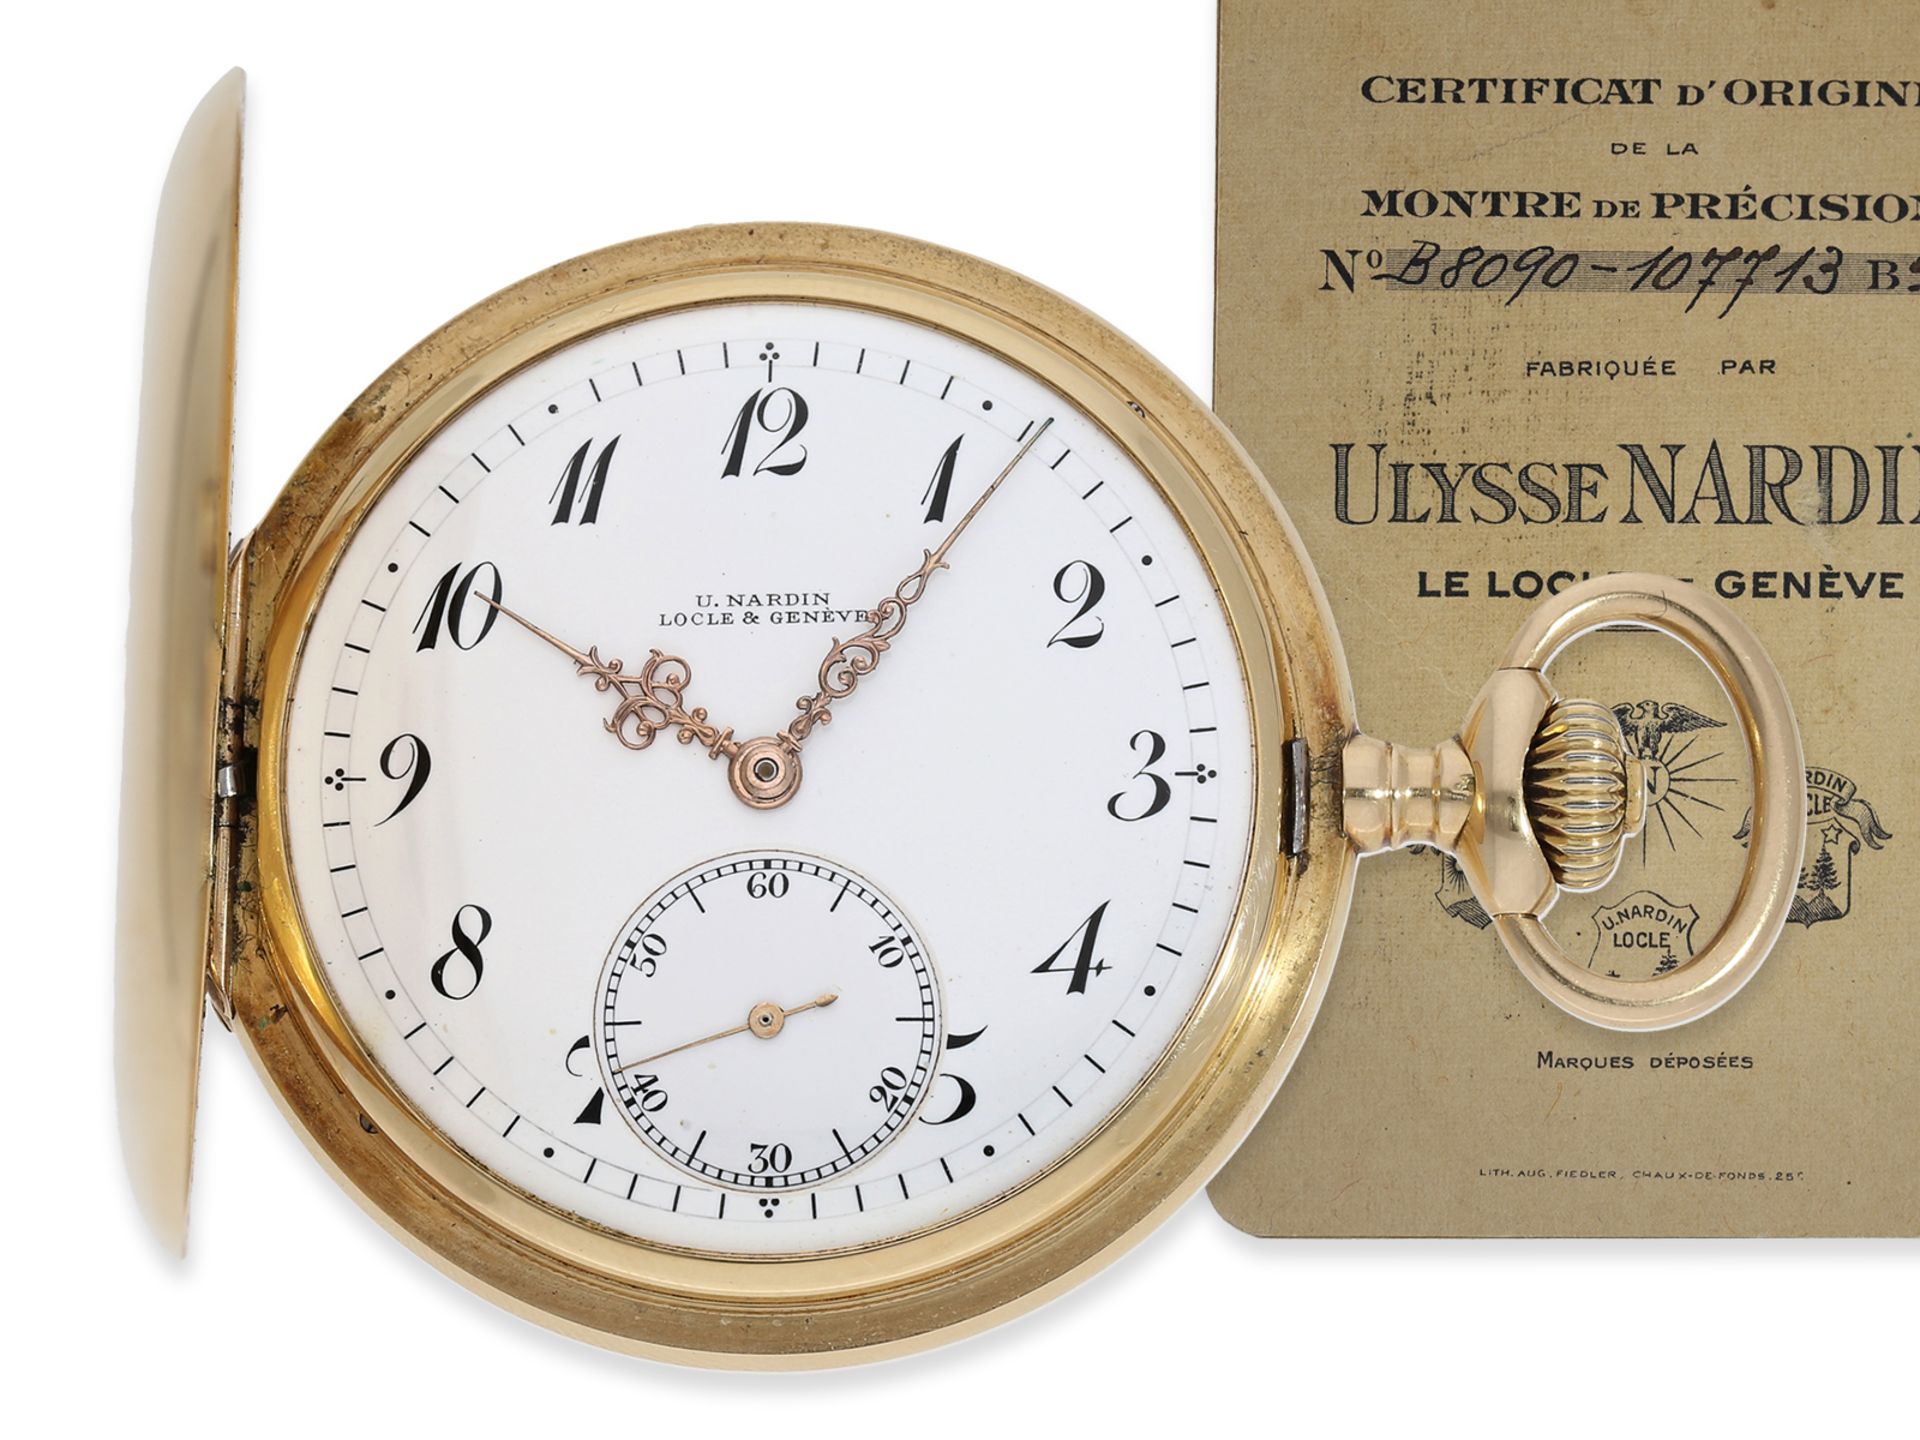 Pocket Watch: very fine precision pocket watch by Ulysse Nardin with original papers from 1913